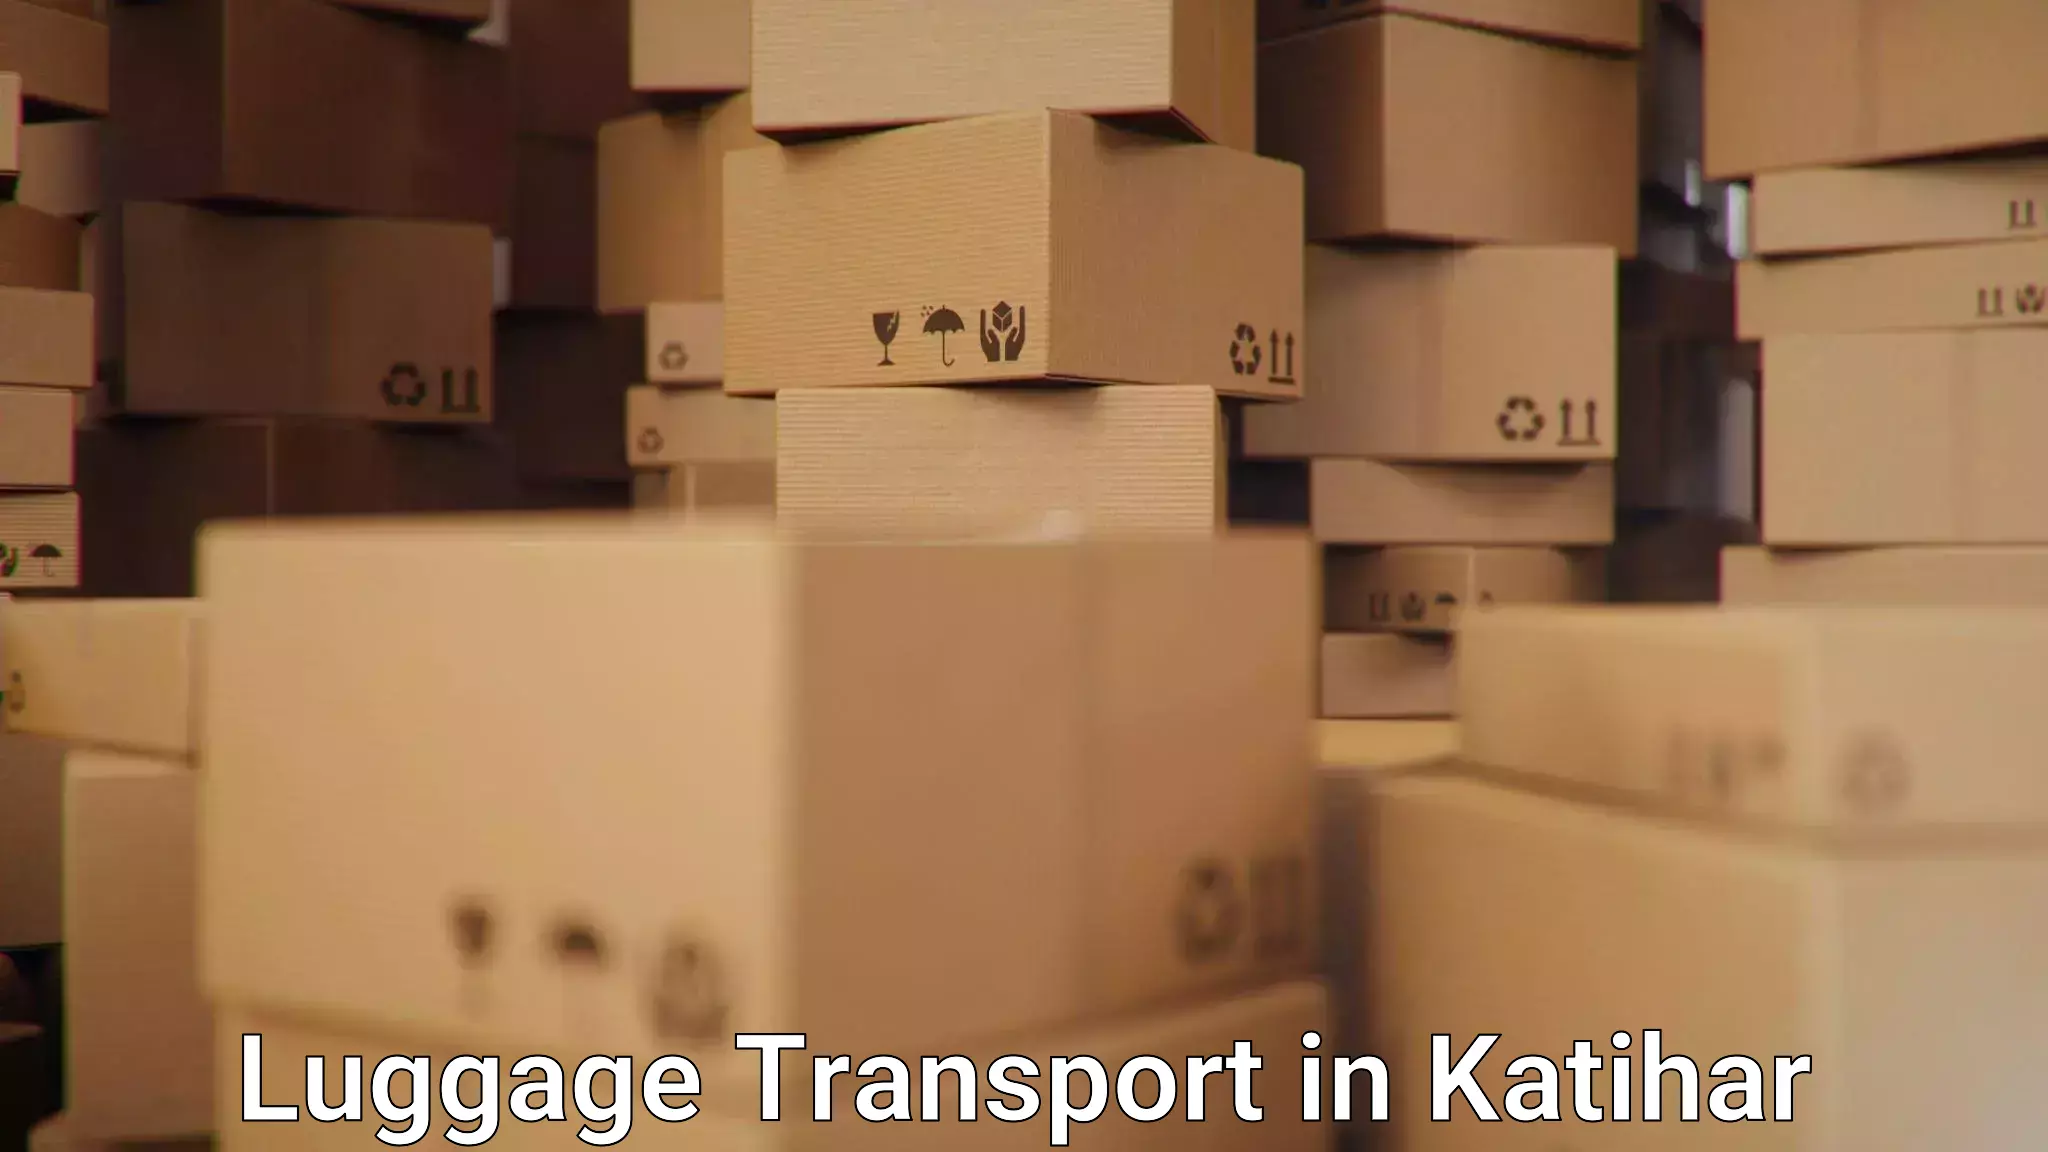 Luggage transport consultancy in Katihar